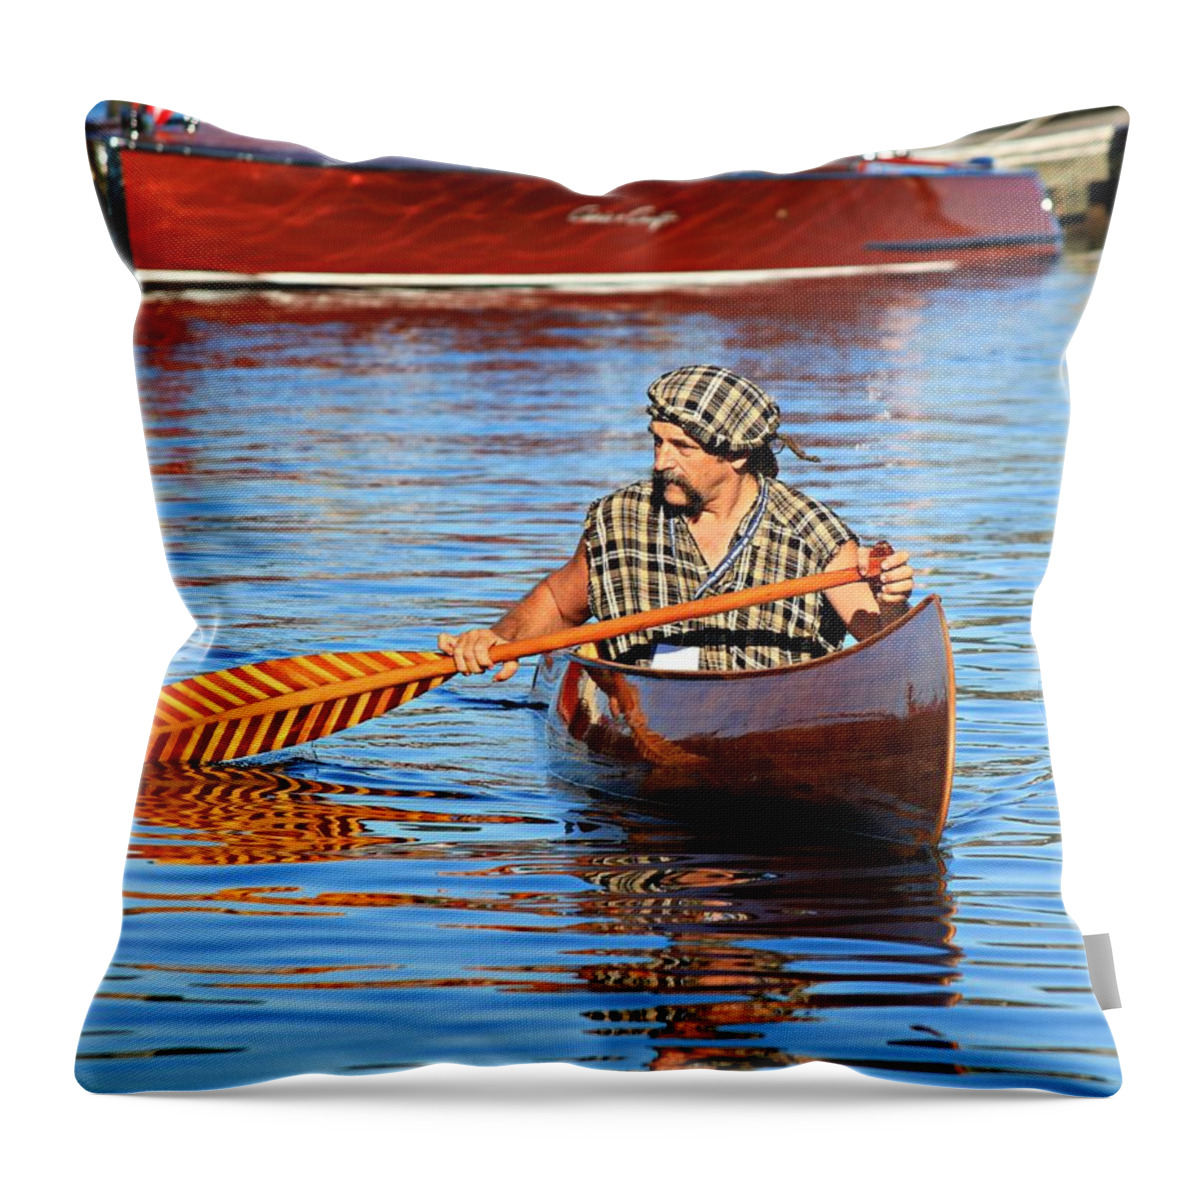 Canoe Throw Pillow featuring the photograph Classic Canoe by Steve Natale